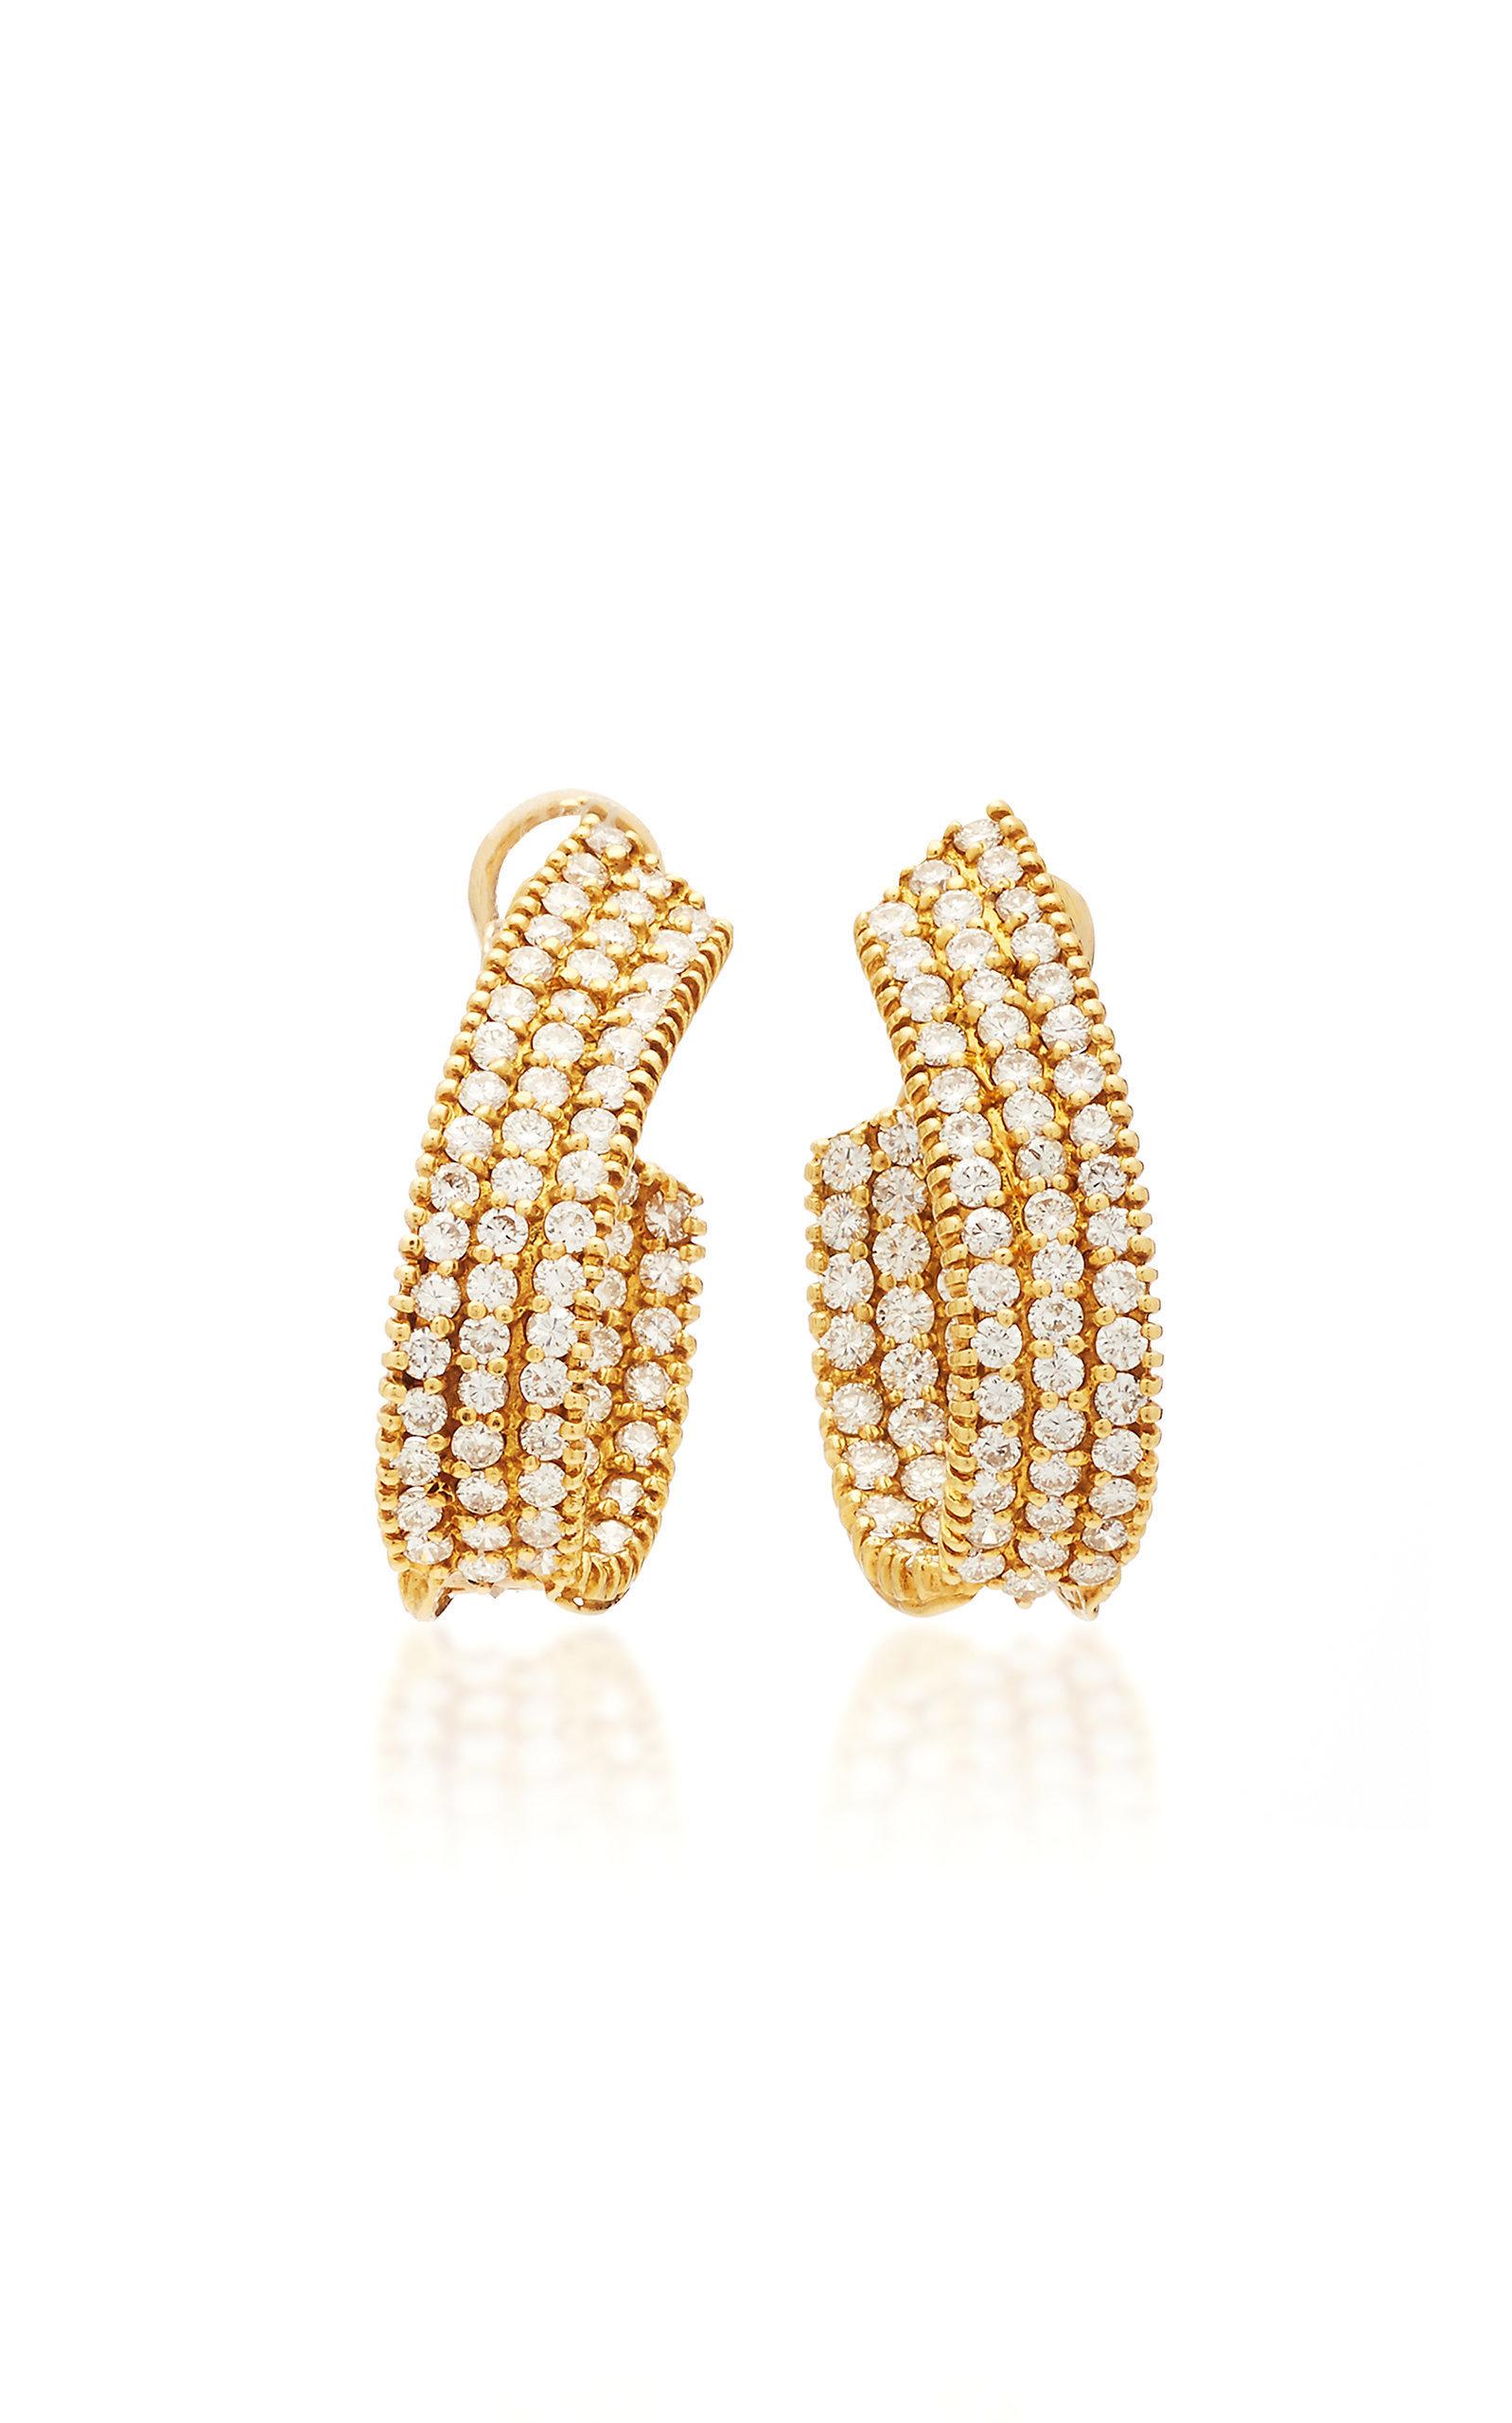 Gold Hoop Diamond Earrings In Good Condition For Sale In New York, NY